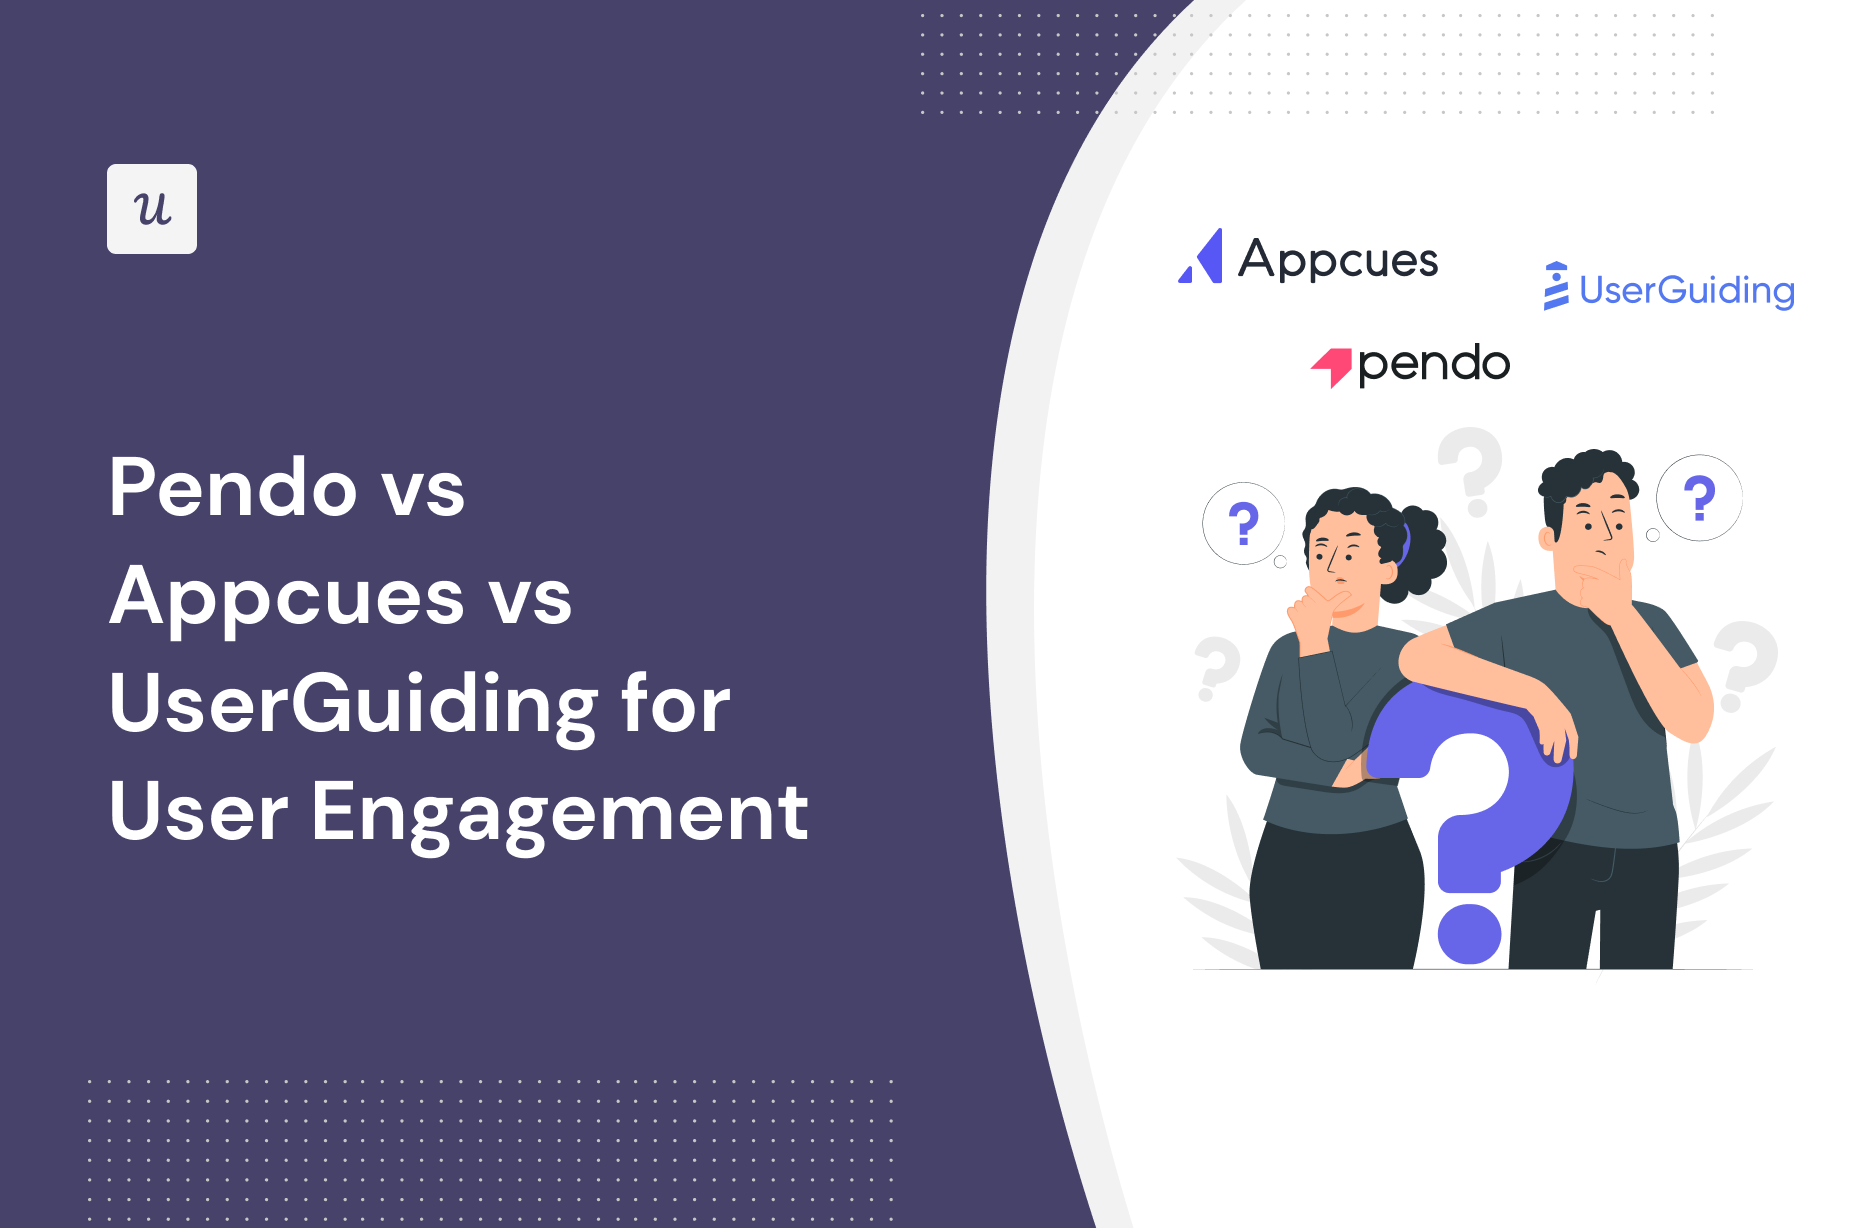 Pendo vs Appcues vs UserGuiding for User Engagement